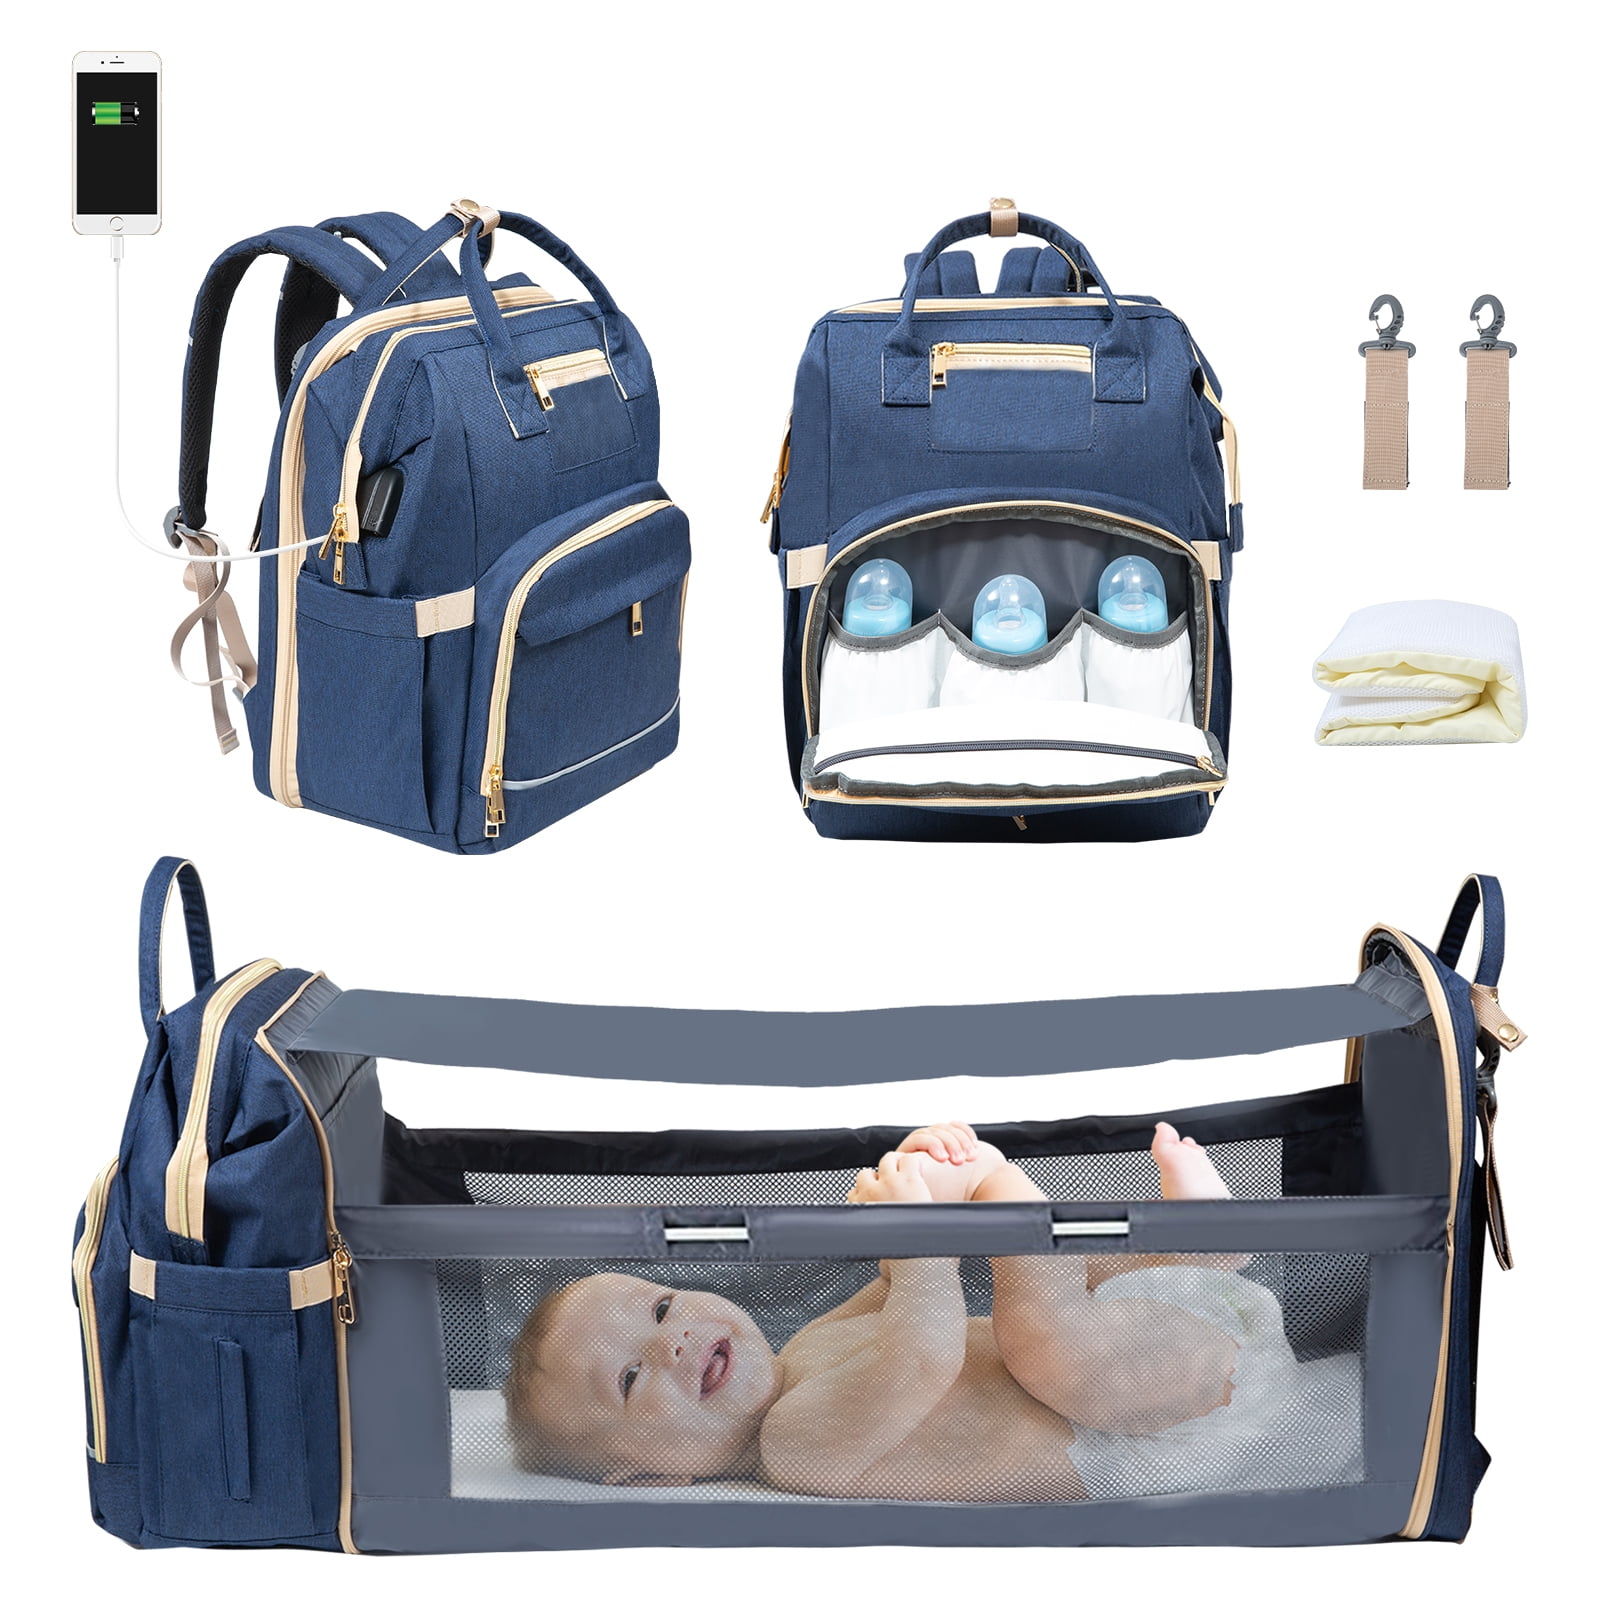 3 in 1 Travel Diaper Bag for Baby Bag + Crib + USB Green Foldable Diaper Crib Portable Diaper Bag with Bassinet Diaper Bag with Changing Station 